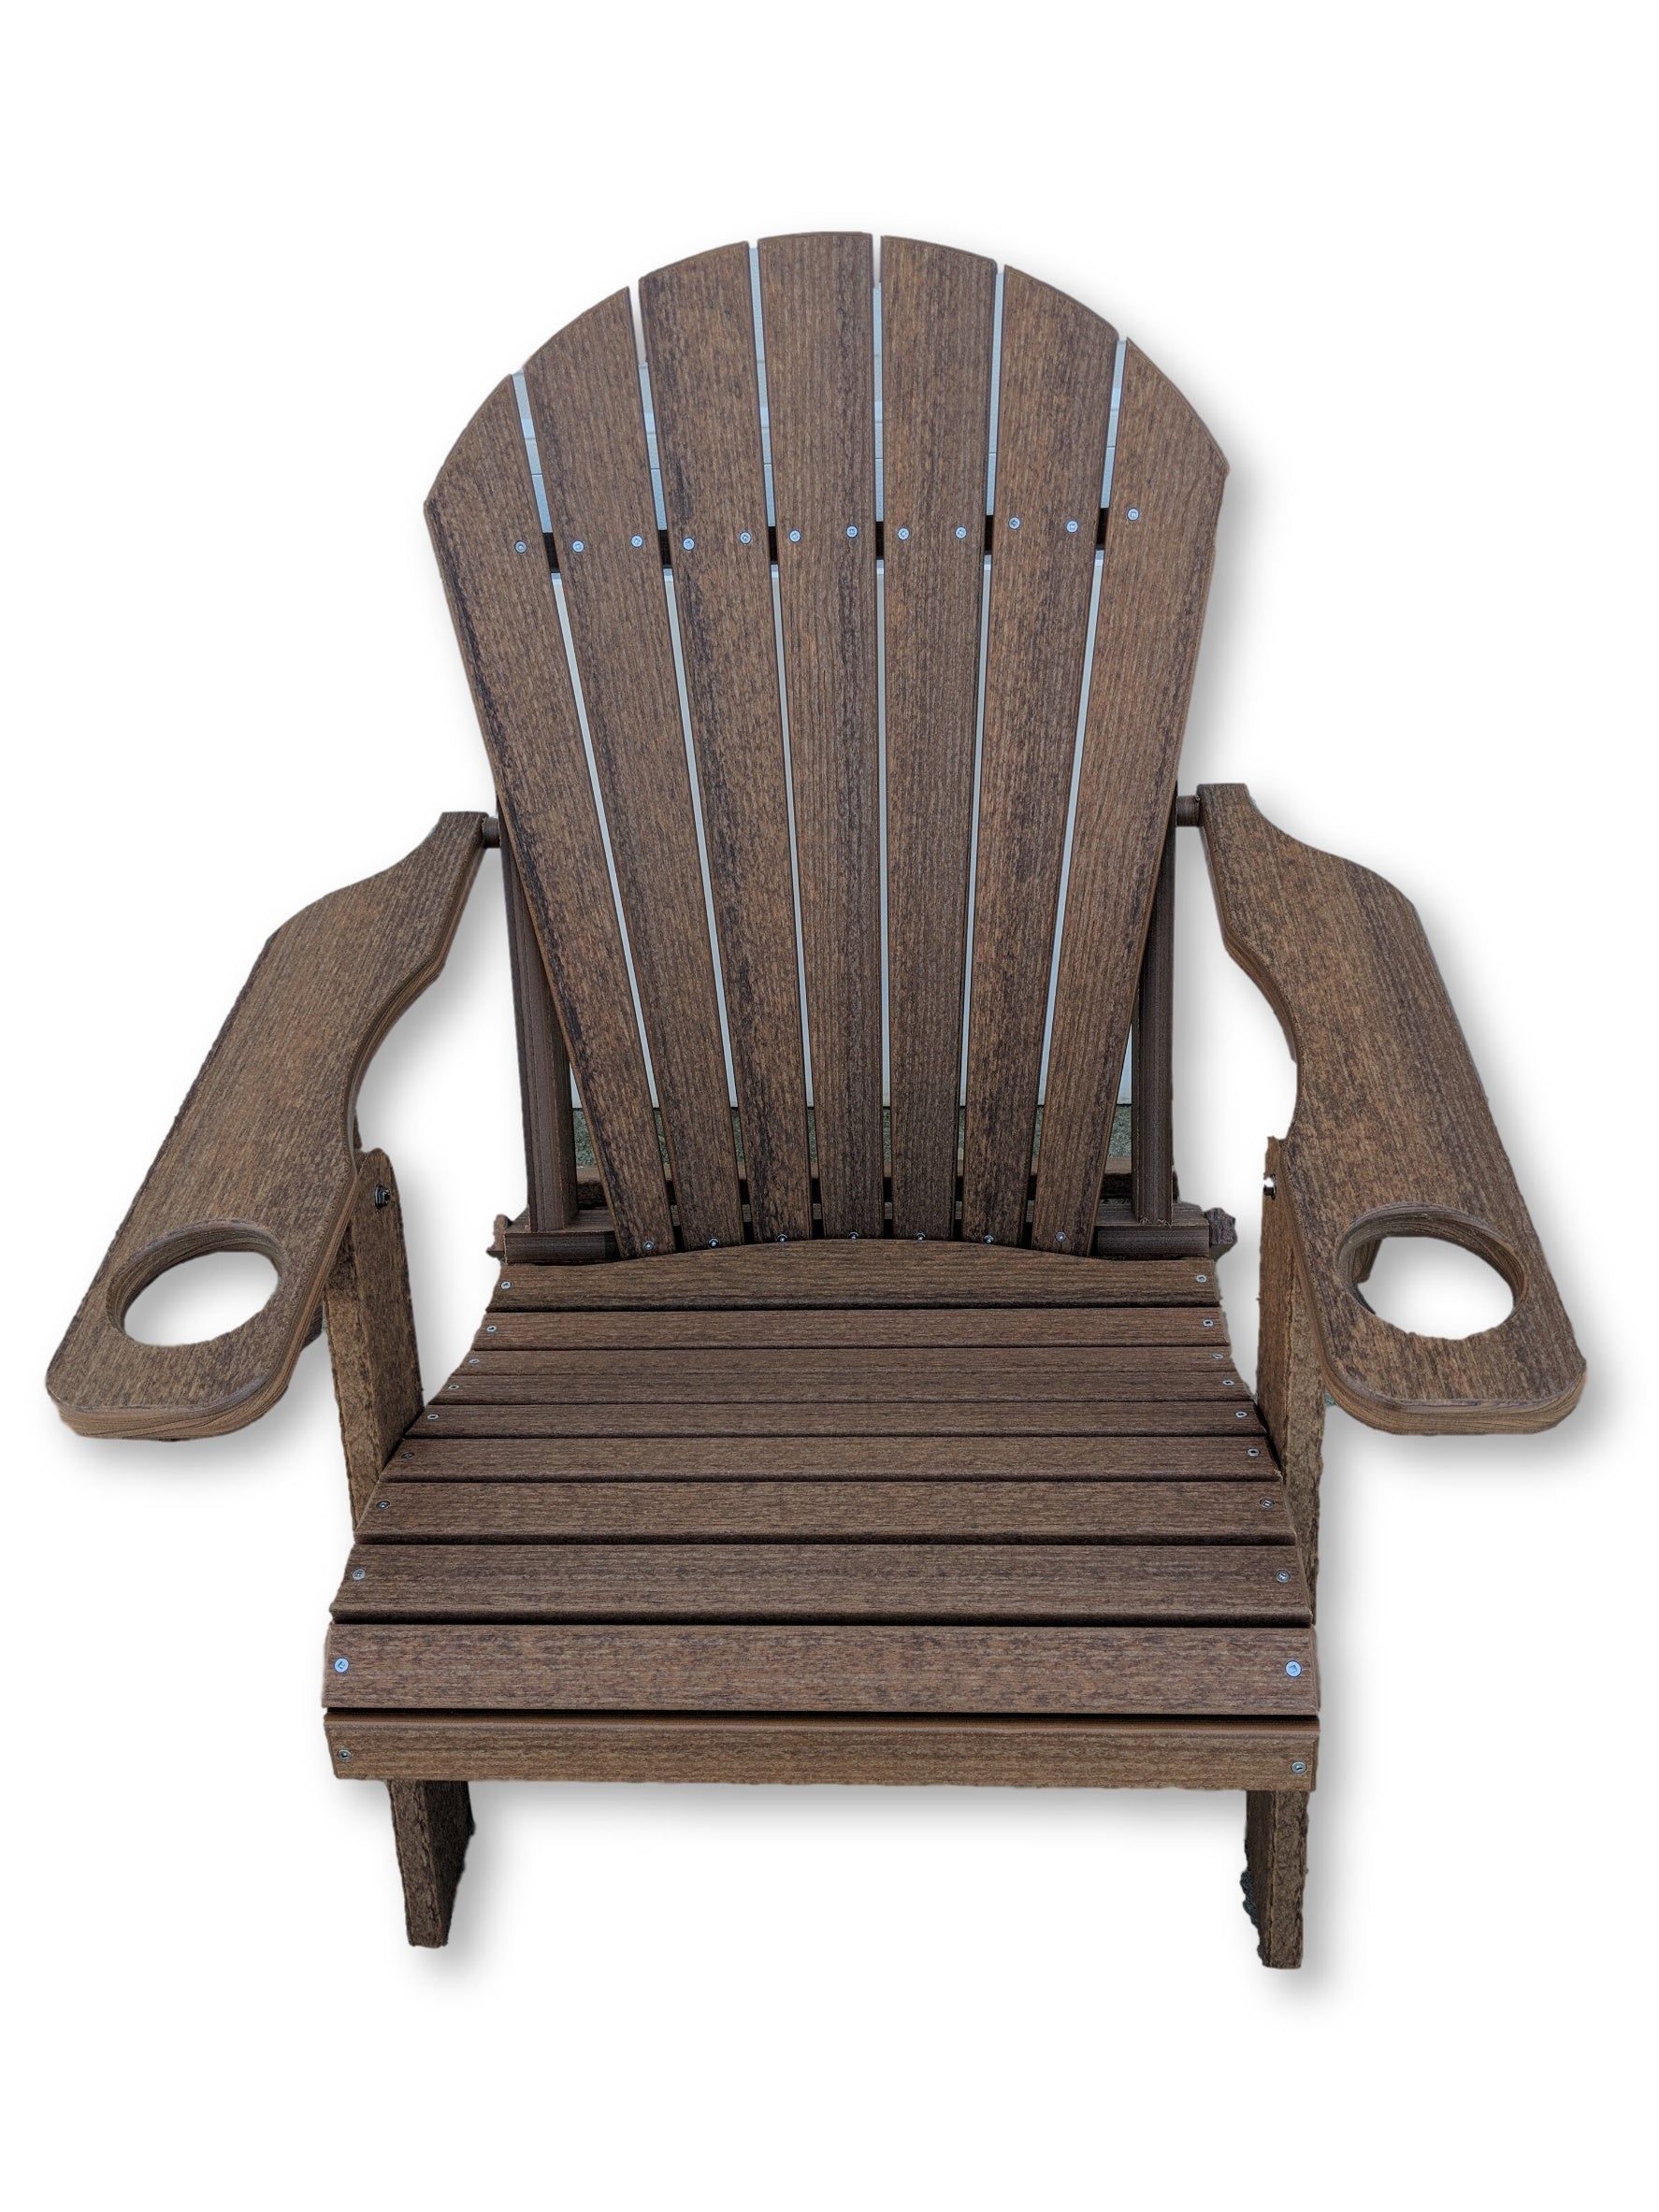 All Weather Poly Furniture Duraweather Adirondack Chairs Cup